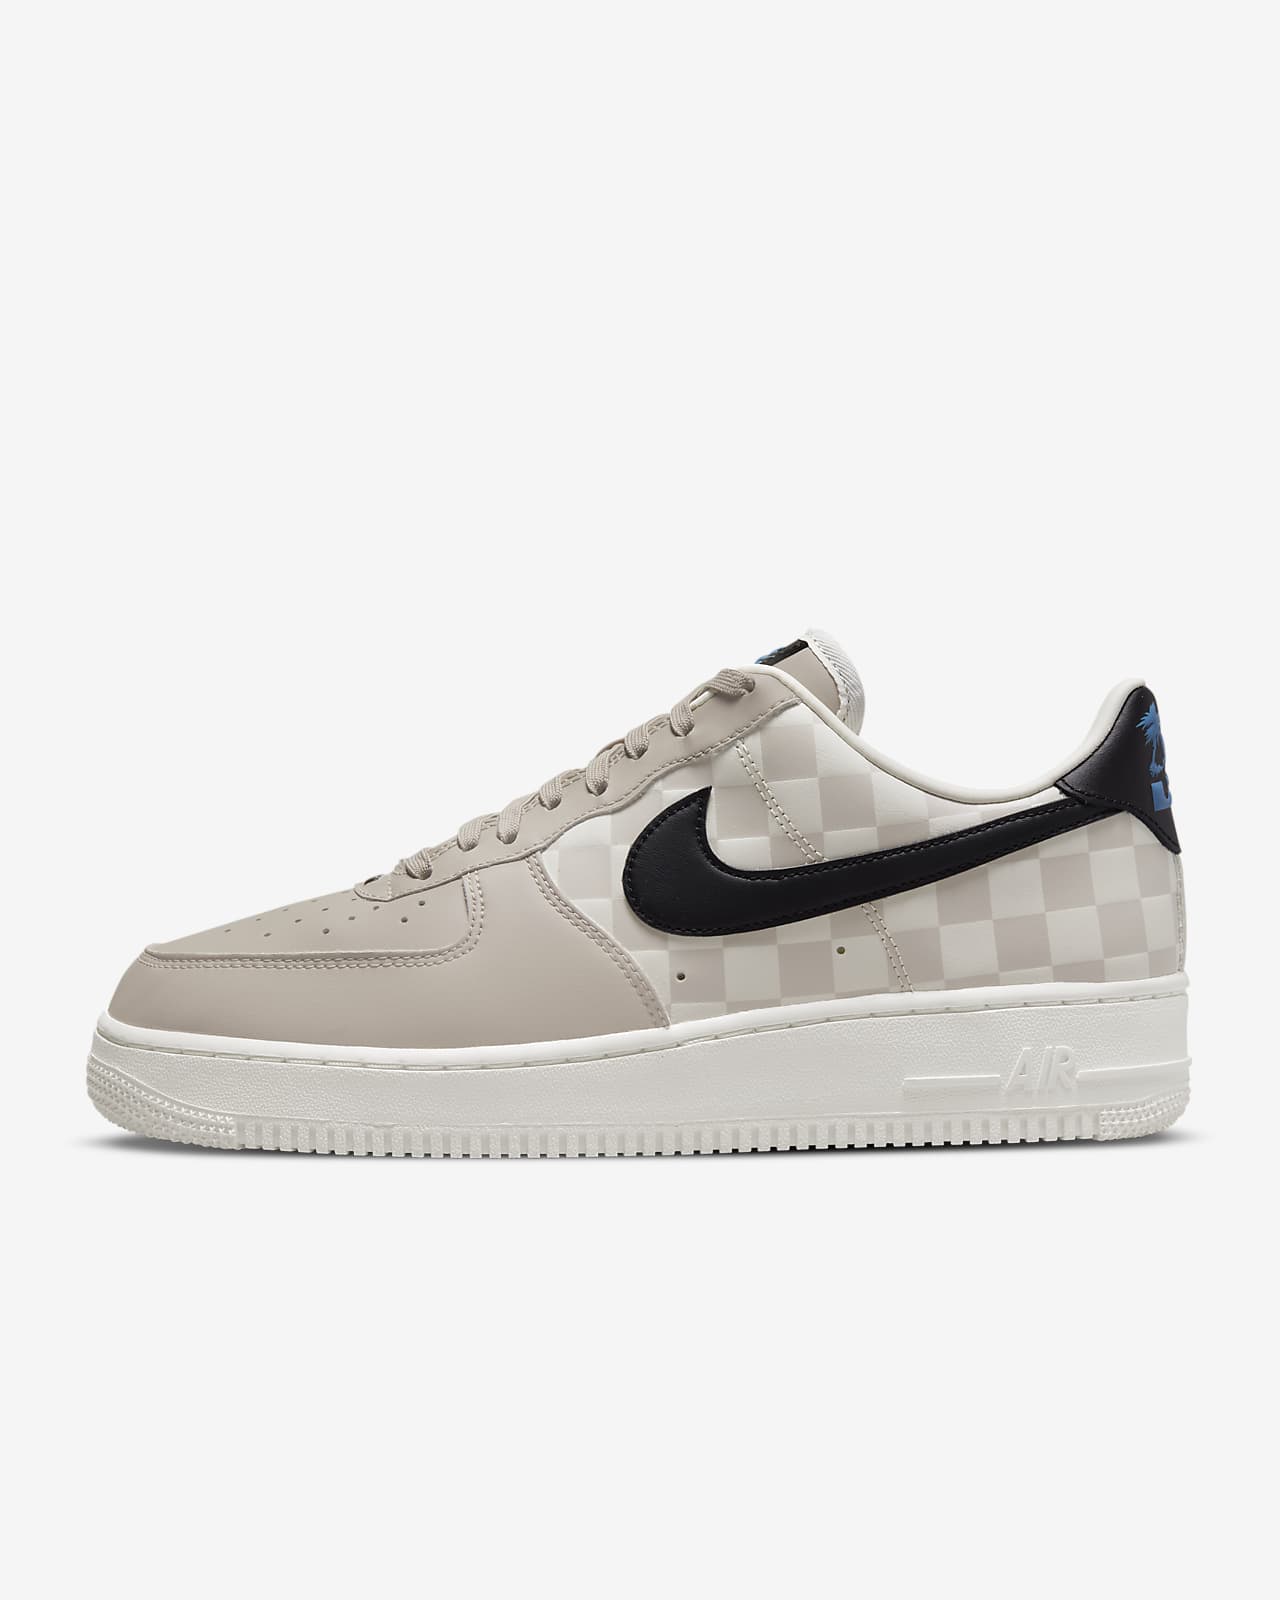 Nike Air Force 1 07 QS Mens Shoes Review